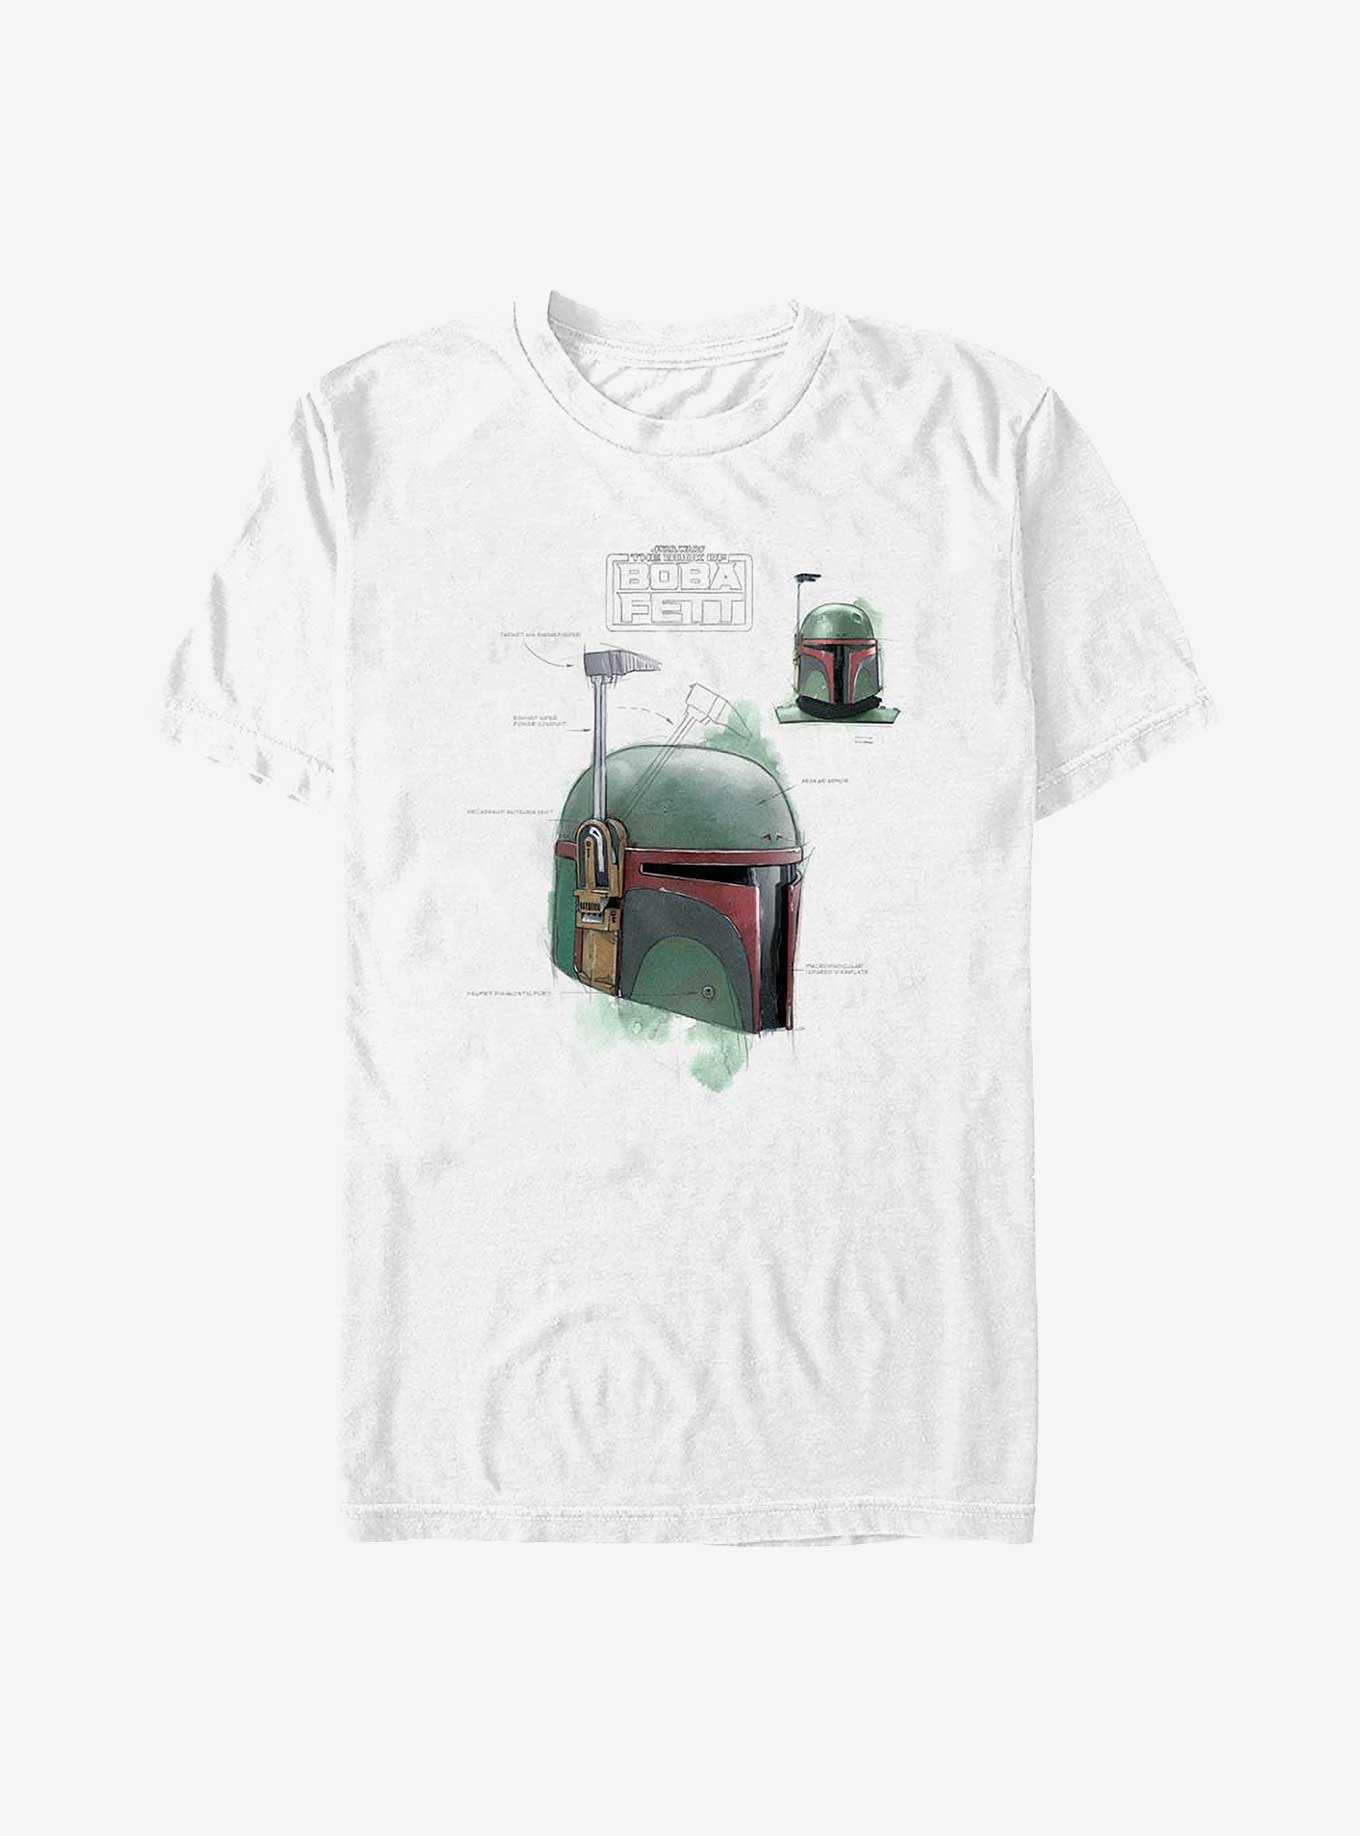 Star Wars: The Book Of Boba Fett Helmet Schematic Painted T-Shirt, , hi-res